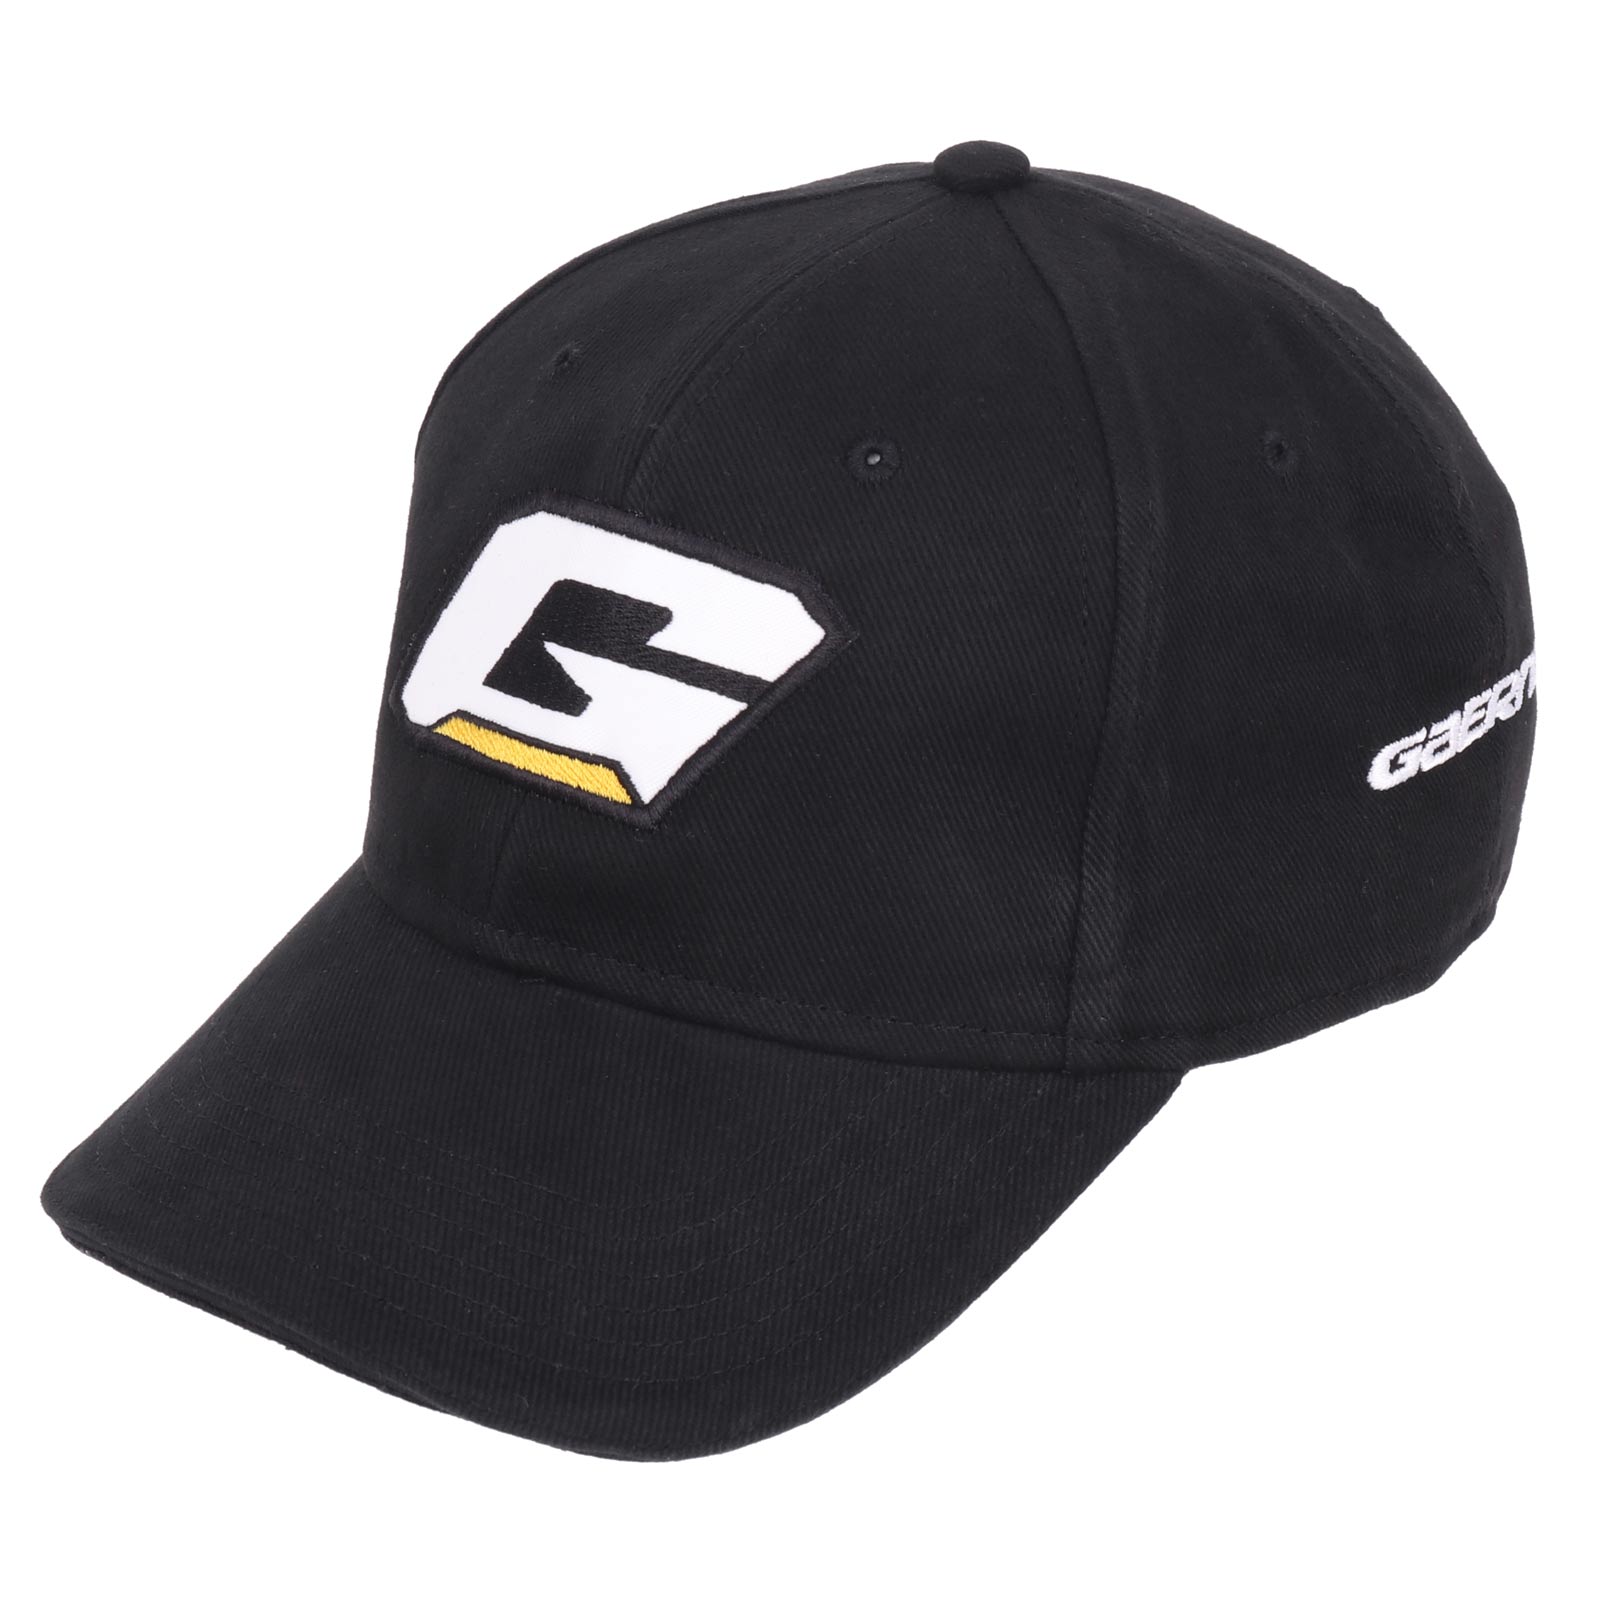 Picture of Gaerne G.Hat - Black